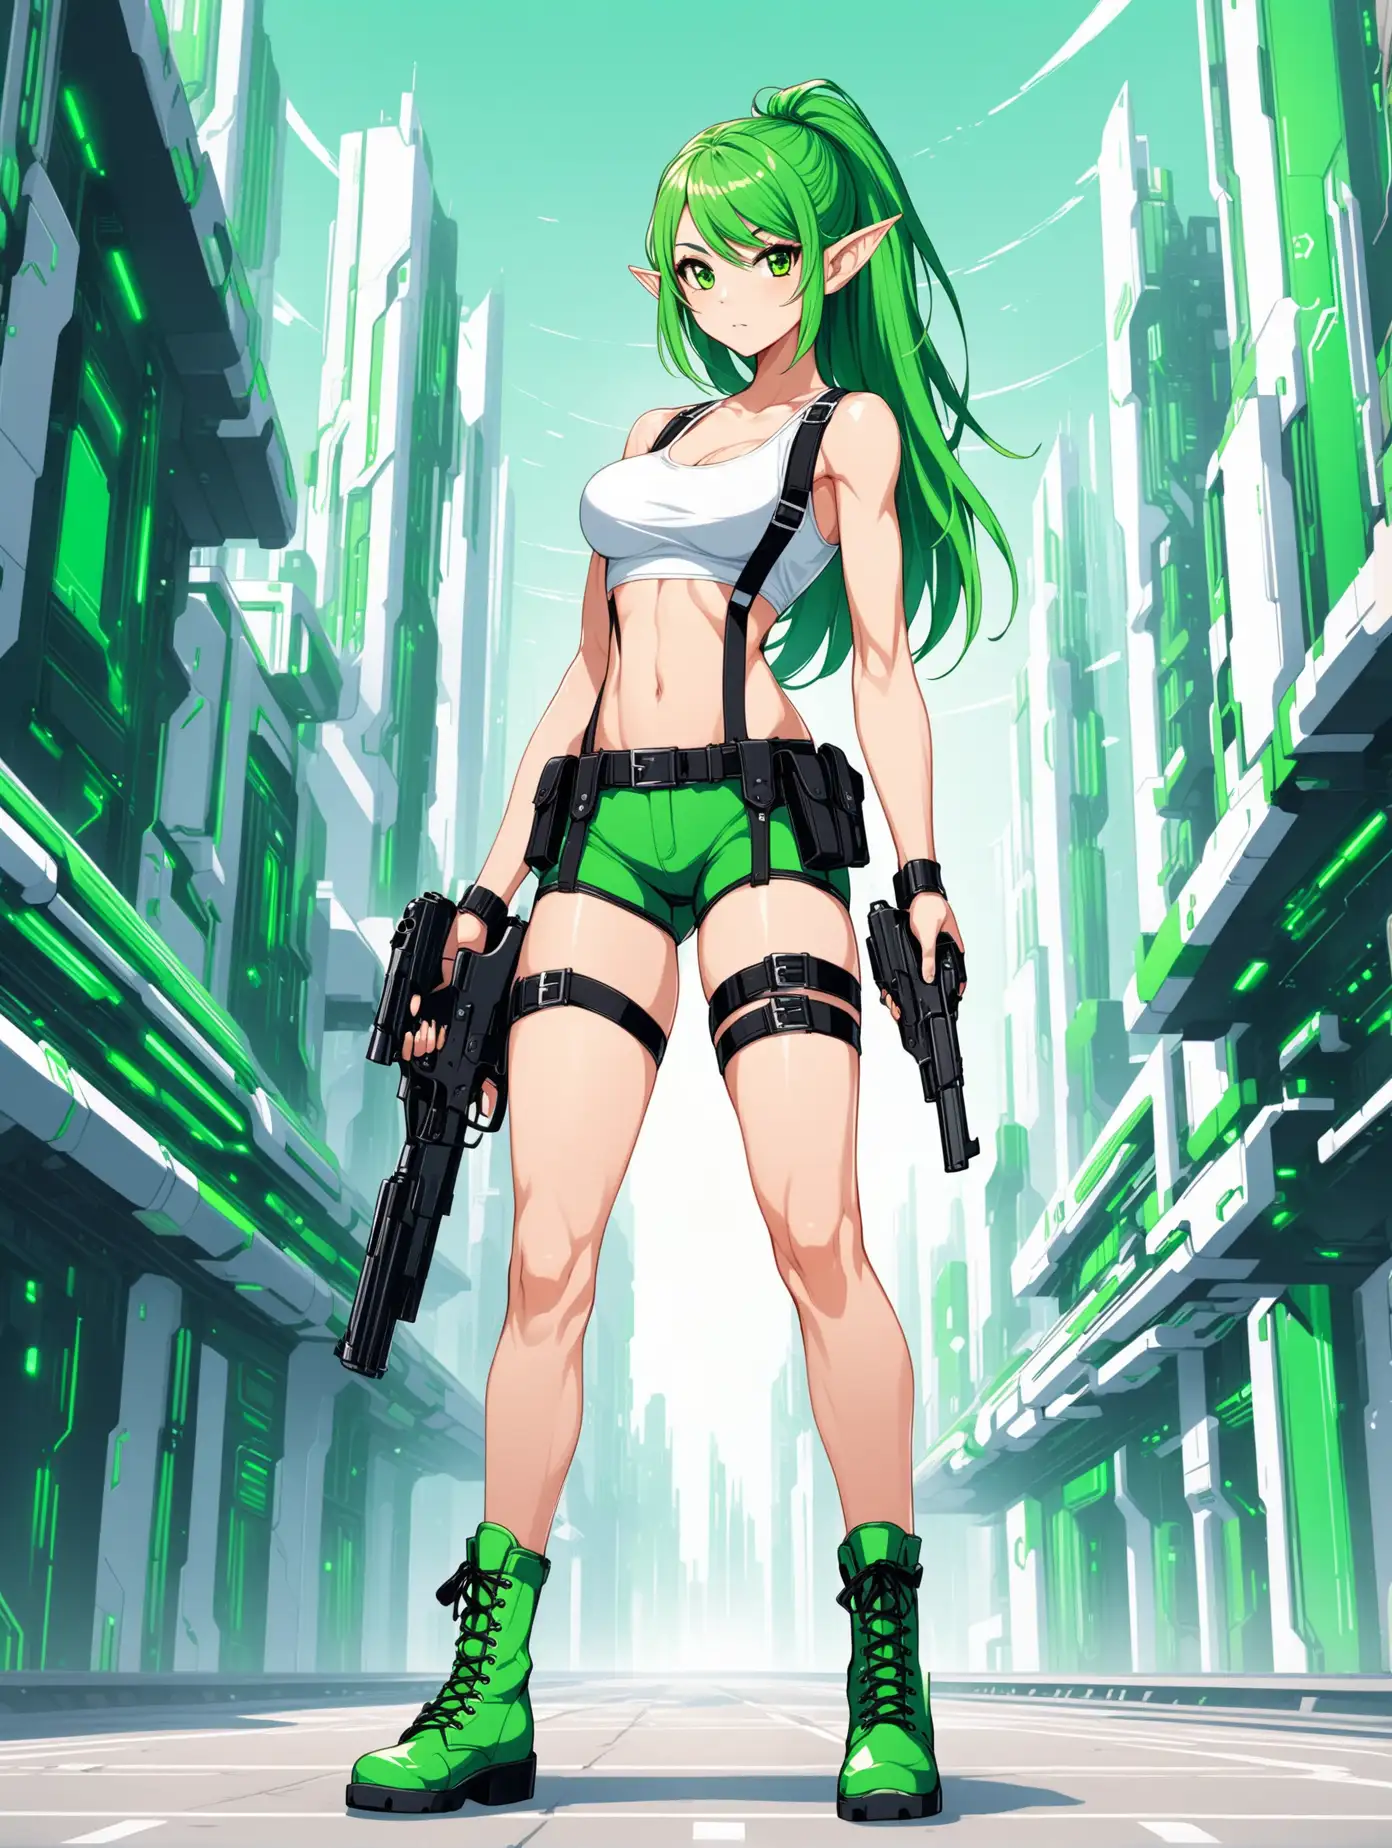 sexy fit 24 year old hero girl, side shave green hair, green eyes, elf ears, posing with handguns in futuristic town, super skinny toned body, short white tank top, sexy midriff, wearing suspenders, holsters on each thigh, combat boots, green black white 3 color minimal design